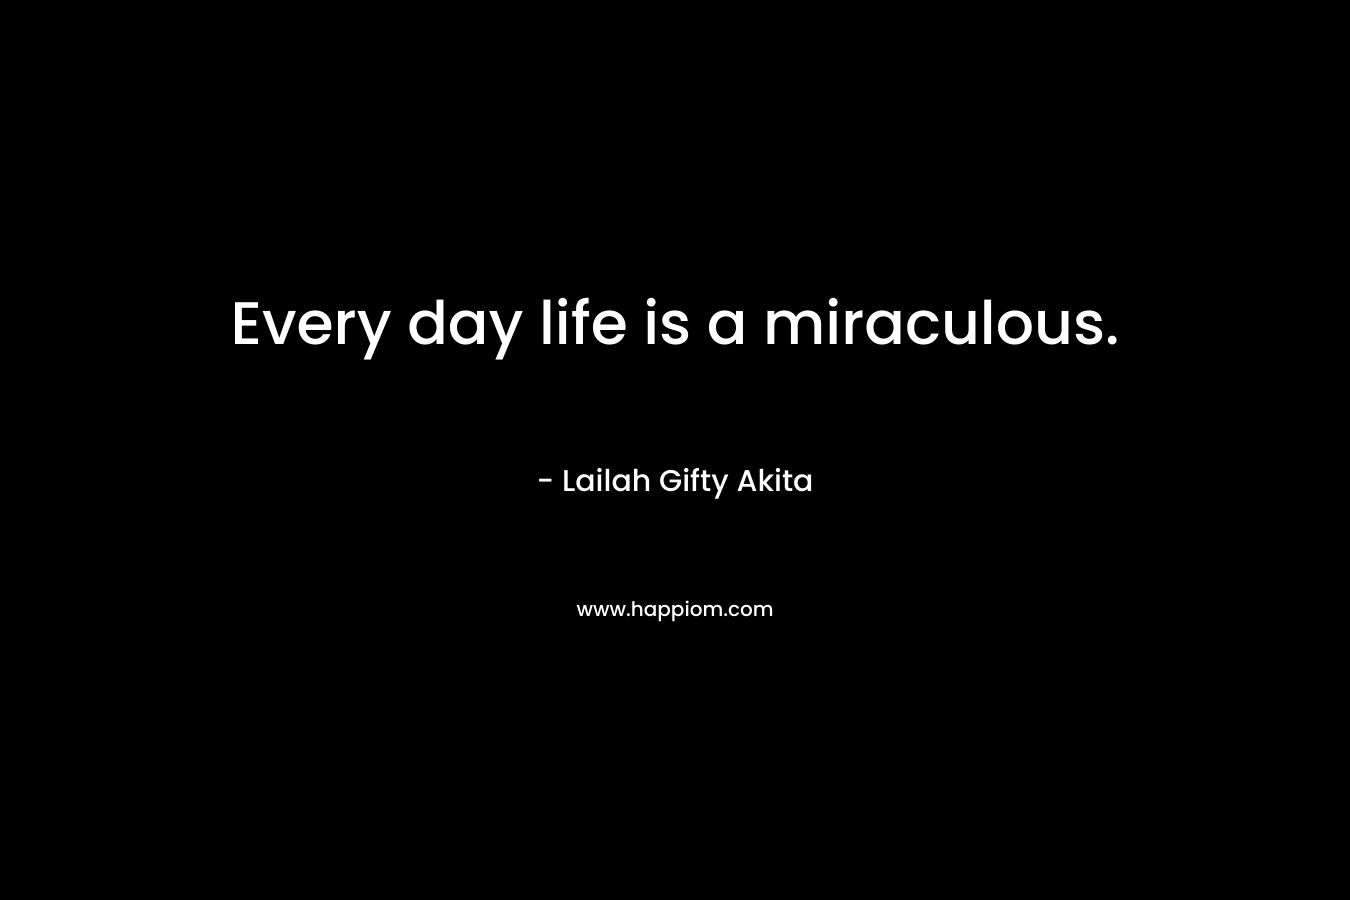 Every day life is a miraculous.